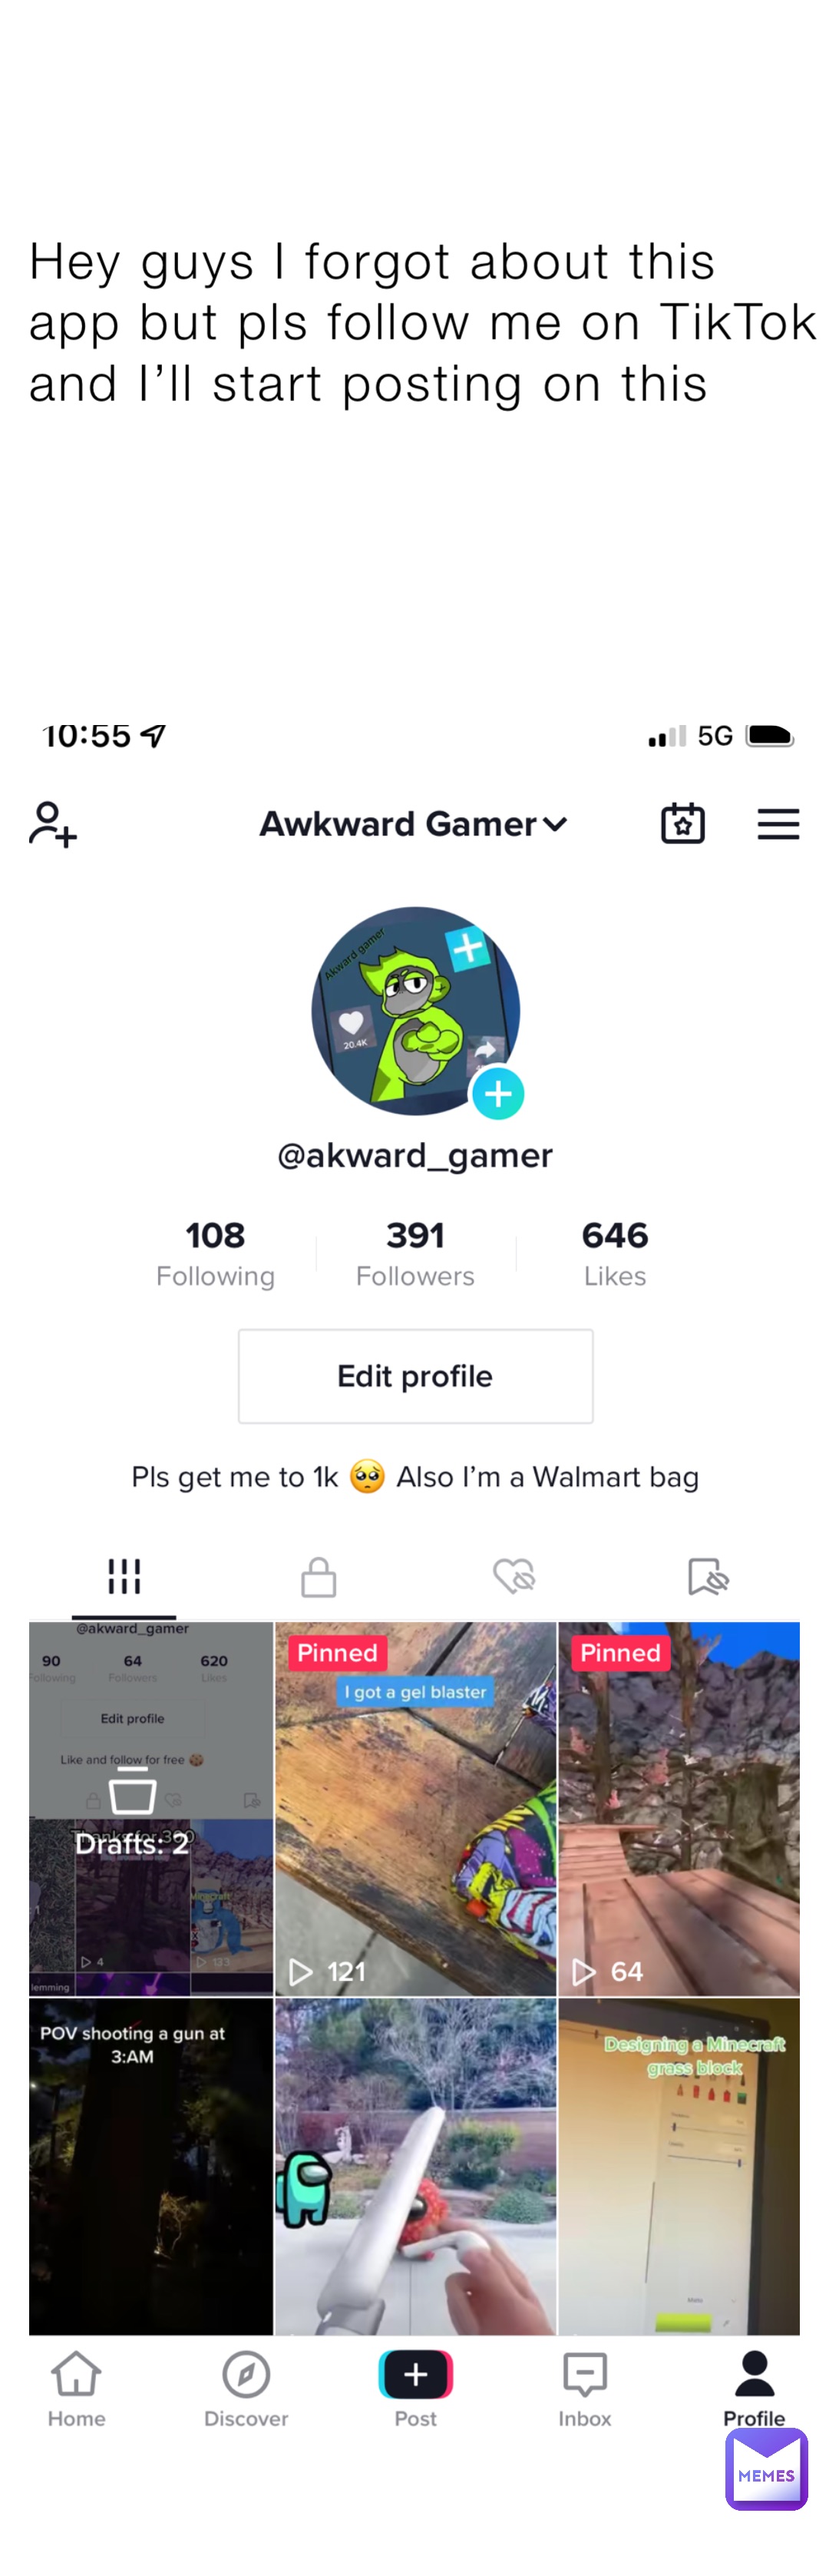 Hey guys I forgot about this app but pls follow me on TikTok and I’ll start posting on this